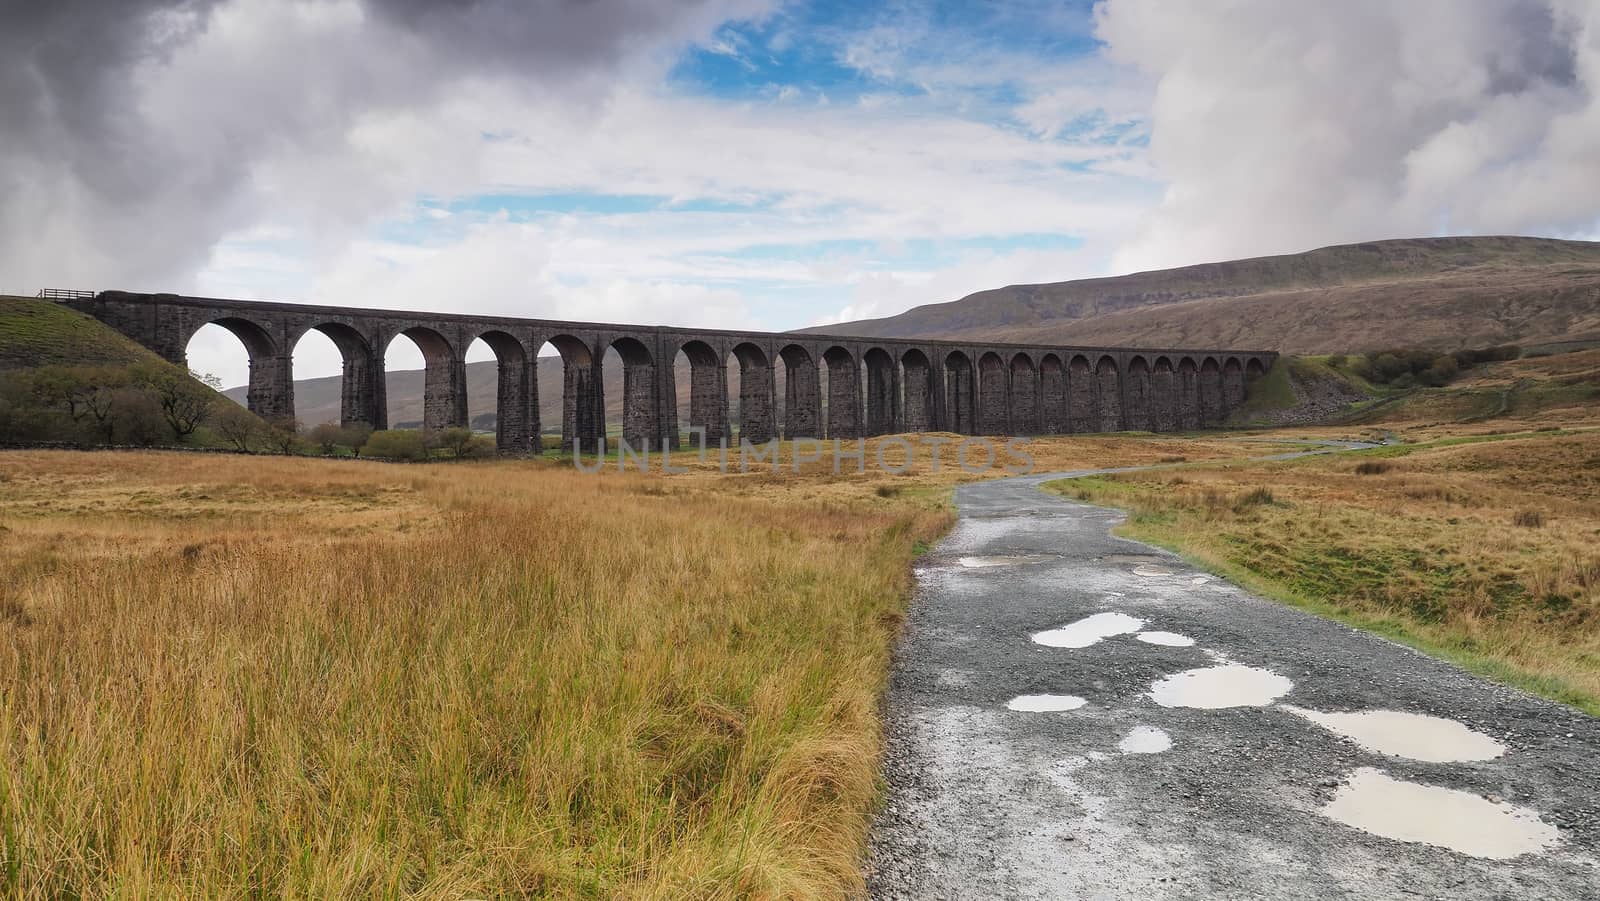 Ribblehead Viaduct carrying the Settle to Carlisle railway, Yorkshire Dales by PhilHarland